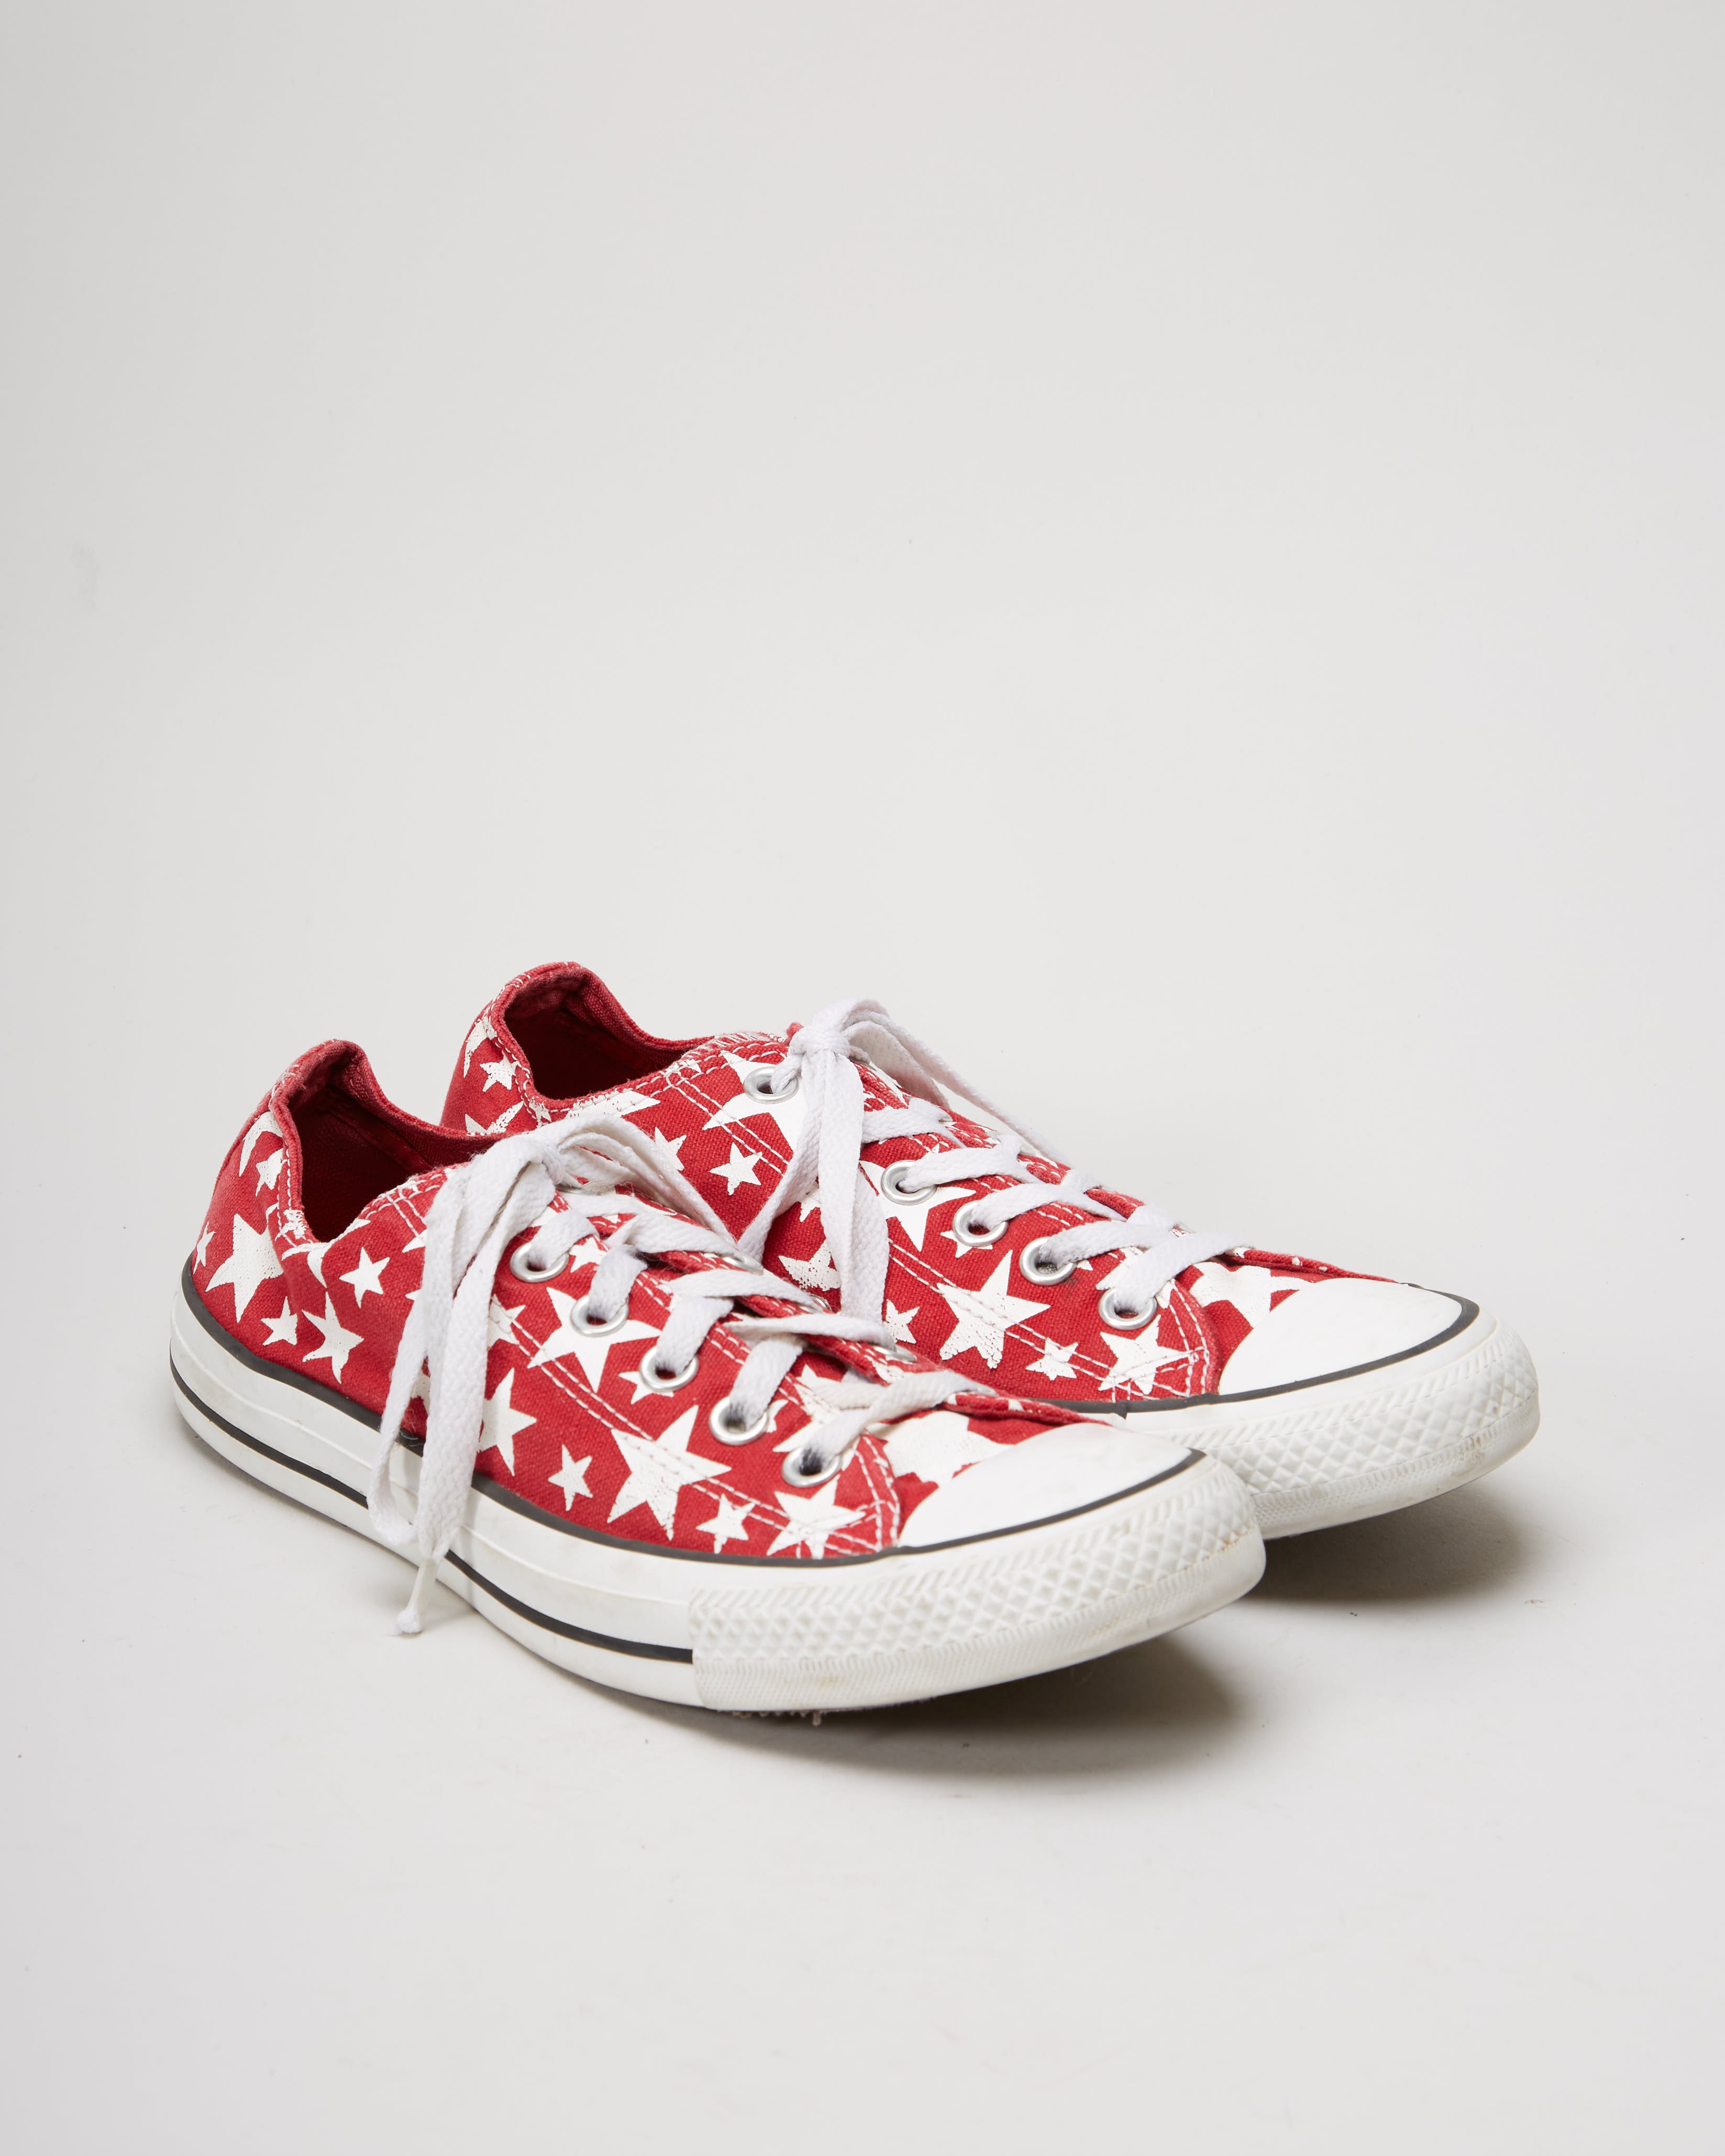 Converse Red All Over Print Star Pattern Low Top Shoes - UK 6